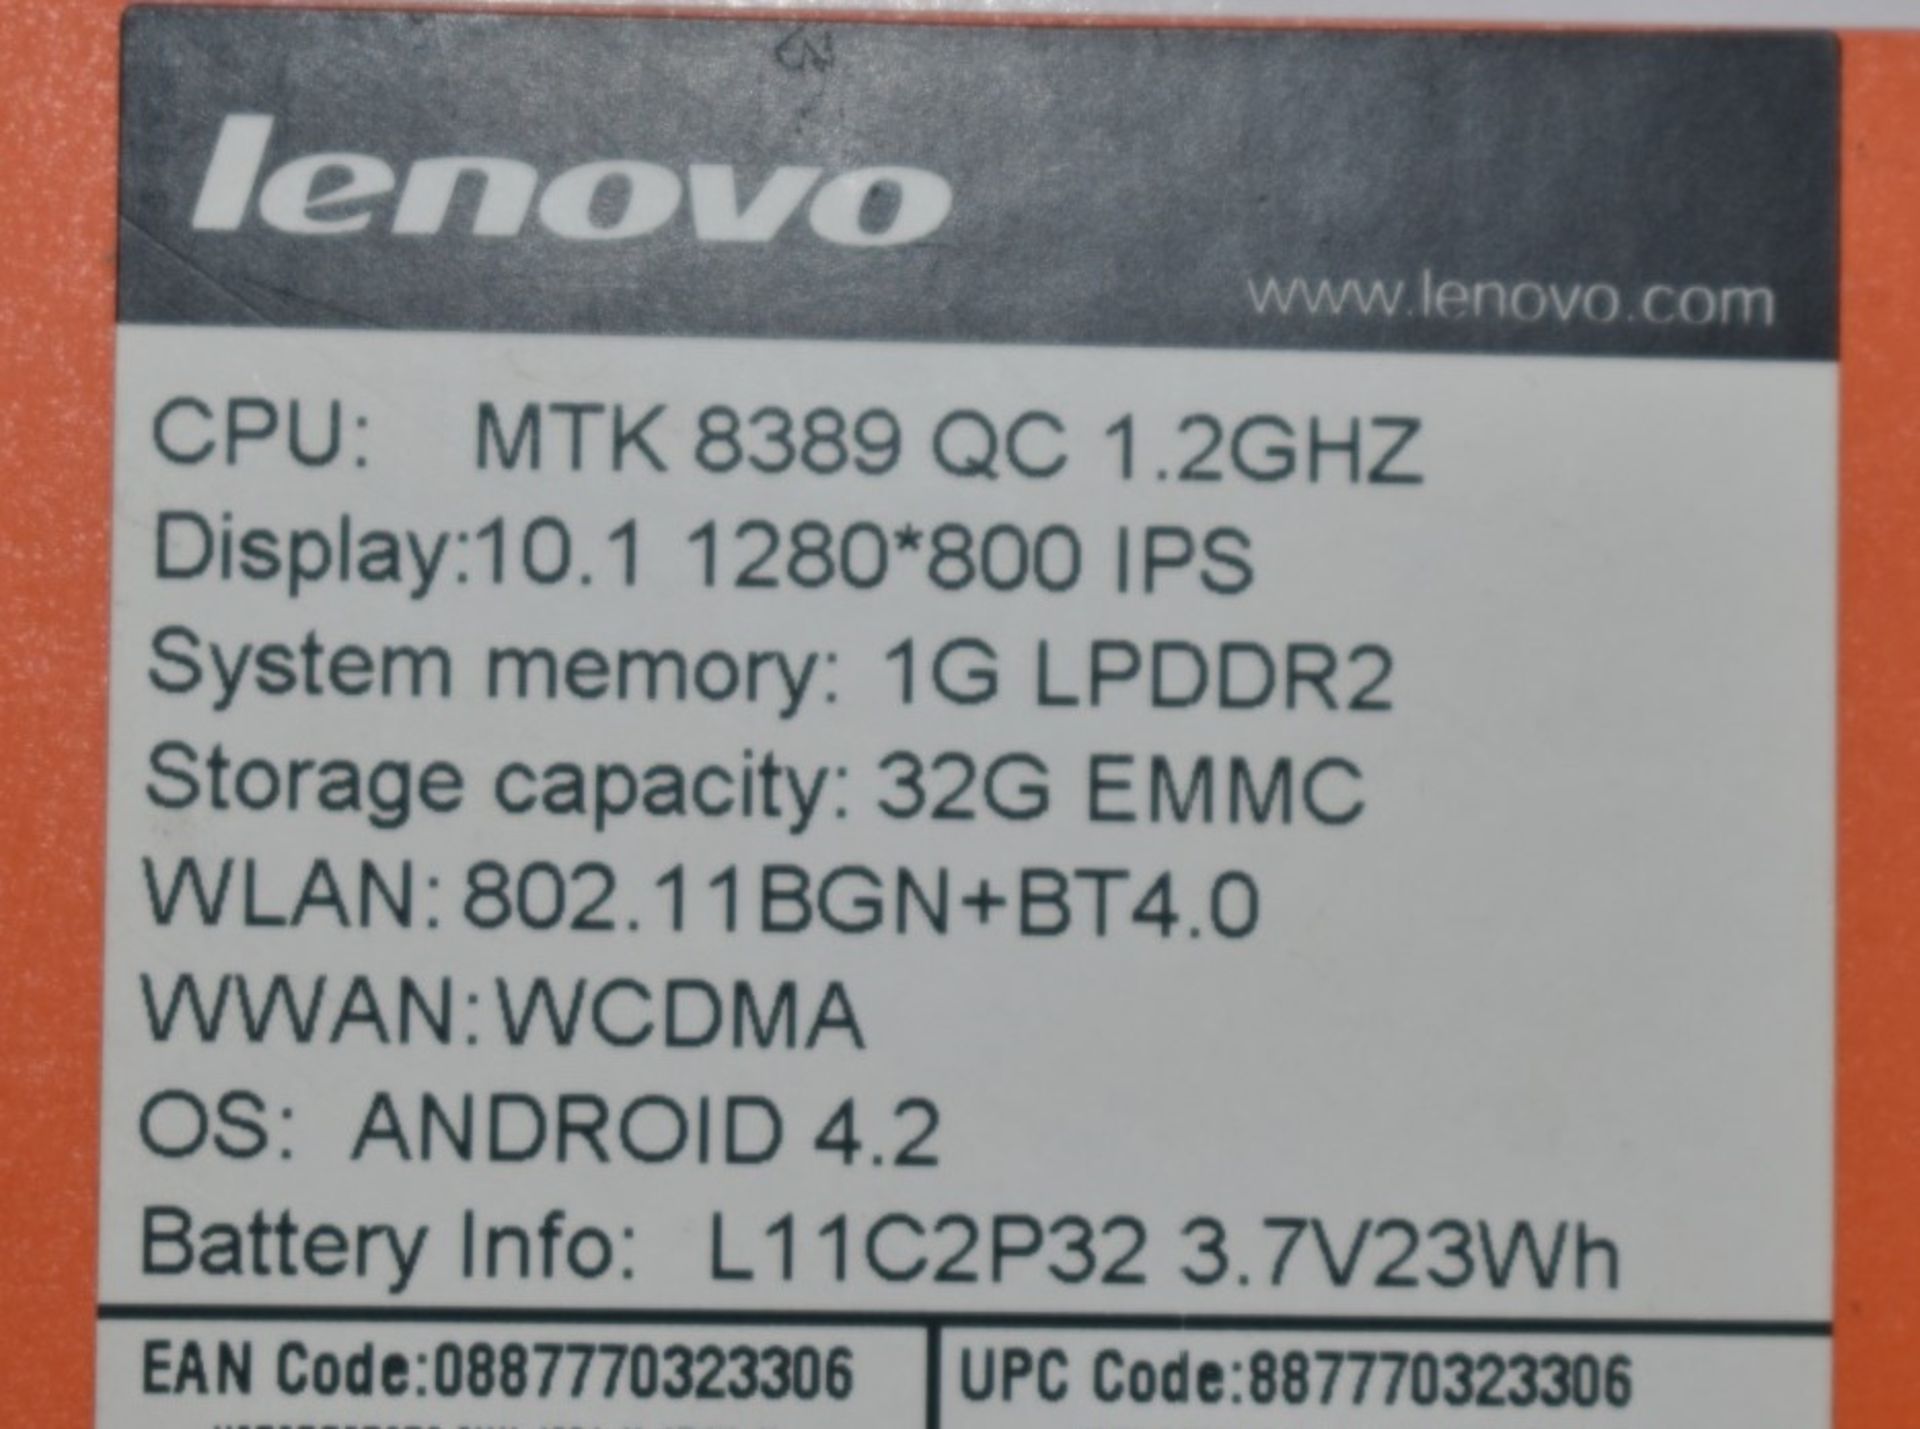 1 x Lenovo S6000 10.1inch Tablet Featuring a Quad Core 1.2GHz Processor, 1GB RAM, 32GB Storage - Image 6 of 6